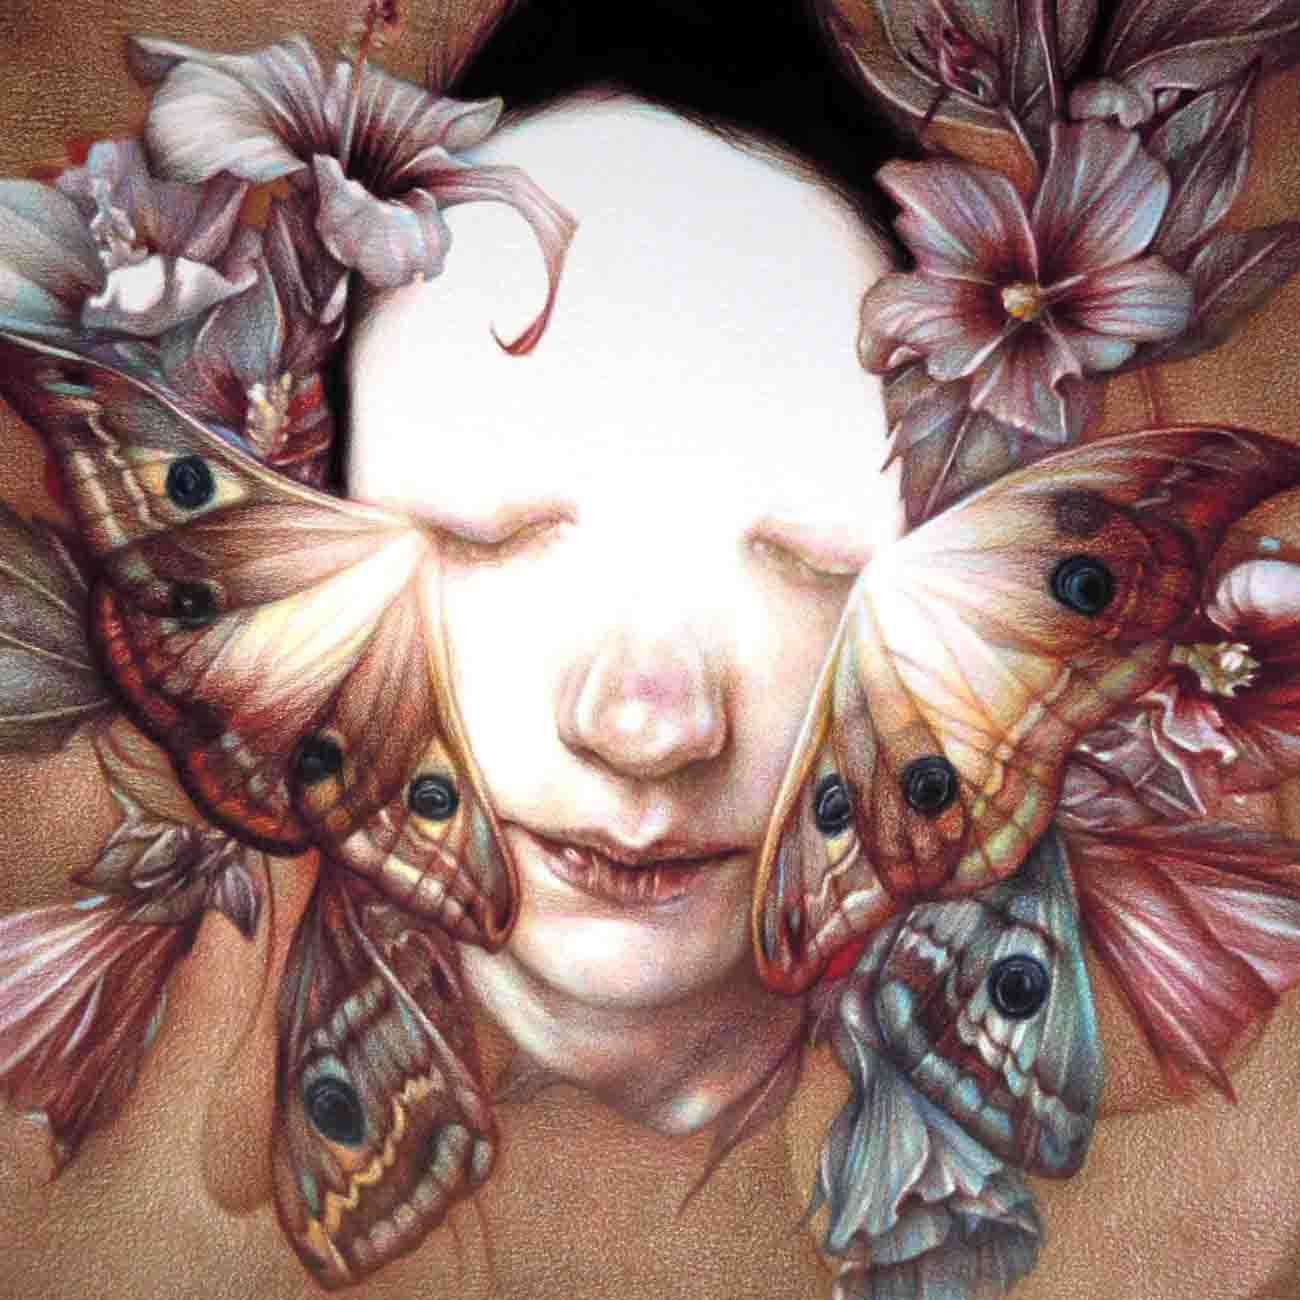 Simple Marco Mazzoni Drawings And Sketches for Adult